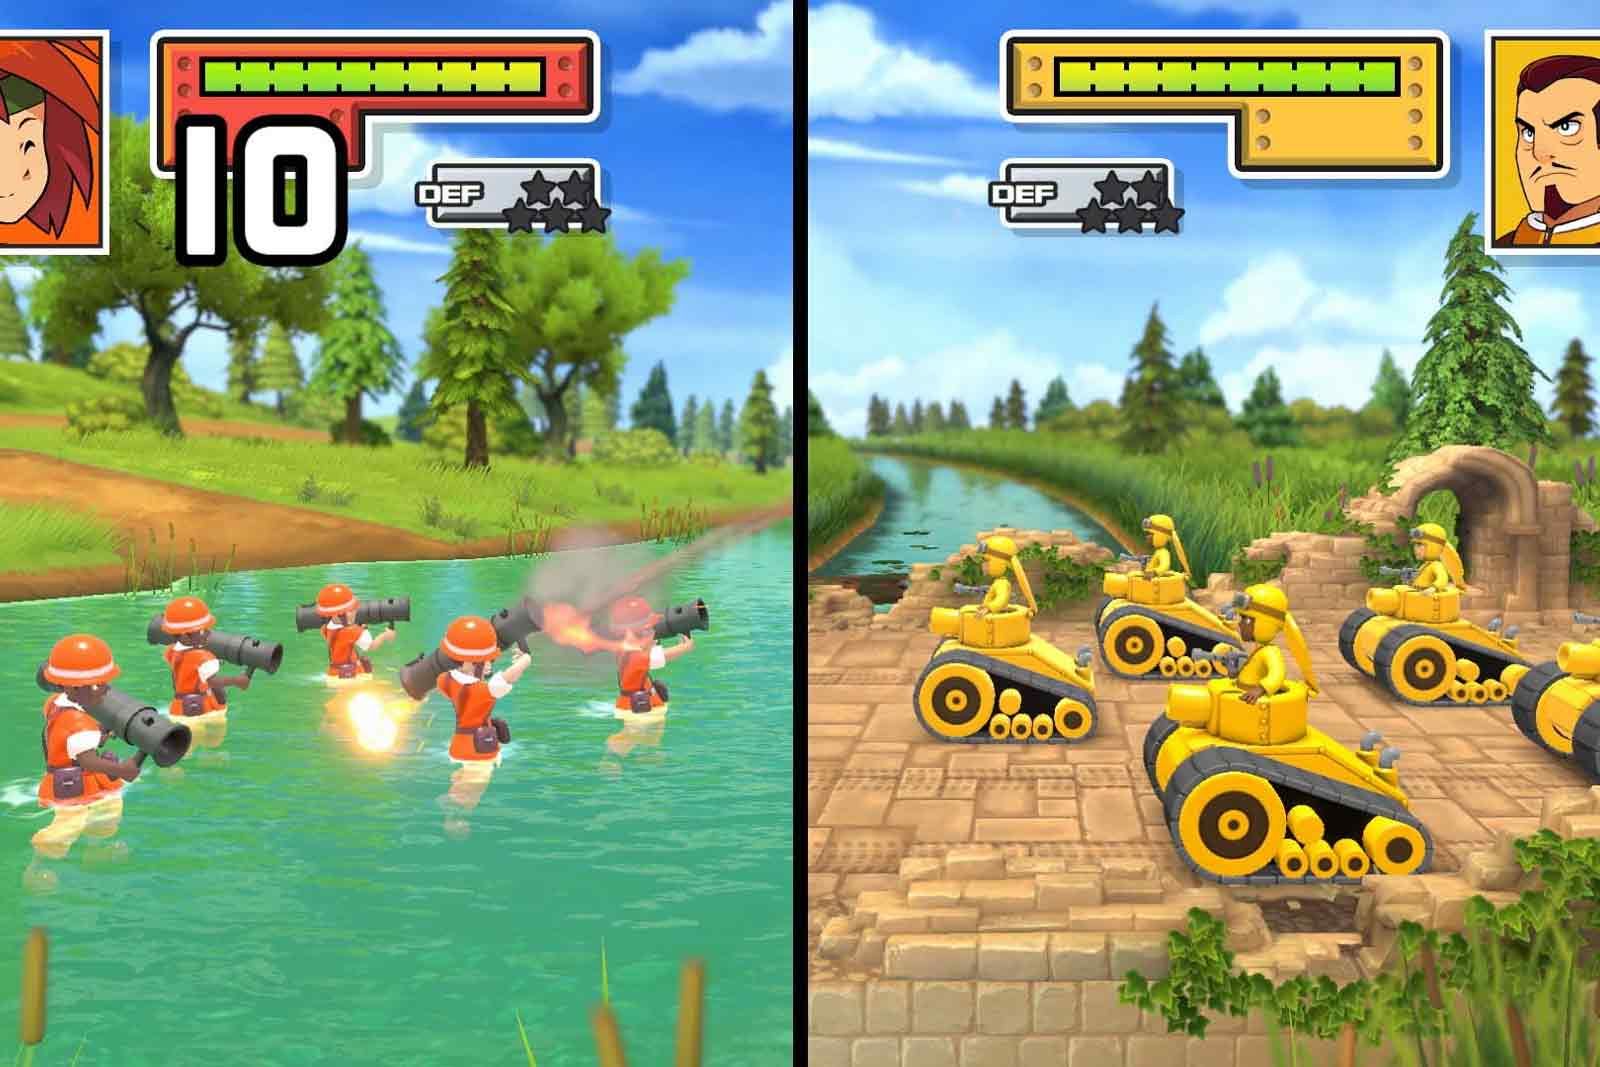 Advance Wars 1+2: Re-Boot Camp review: Toy soldiers, true tactics